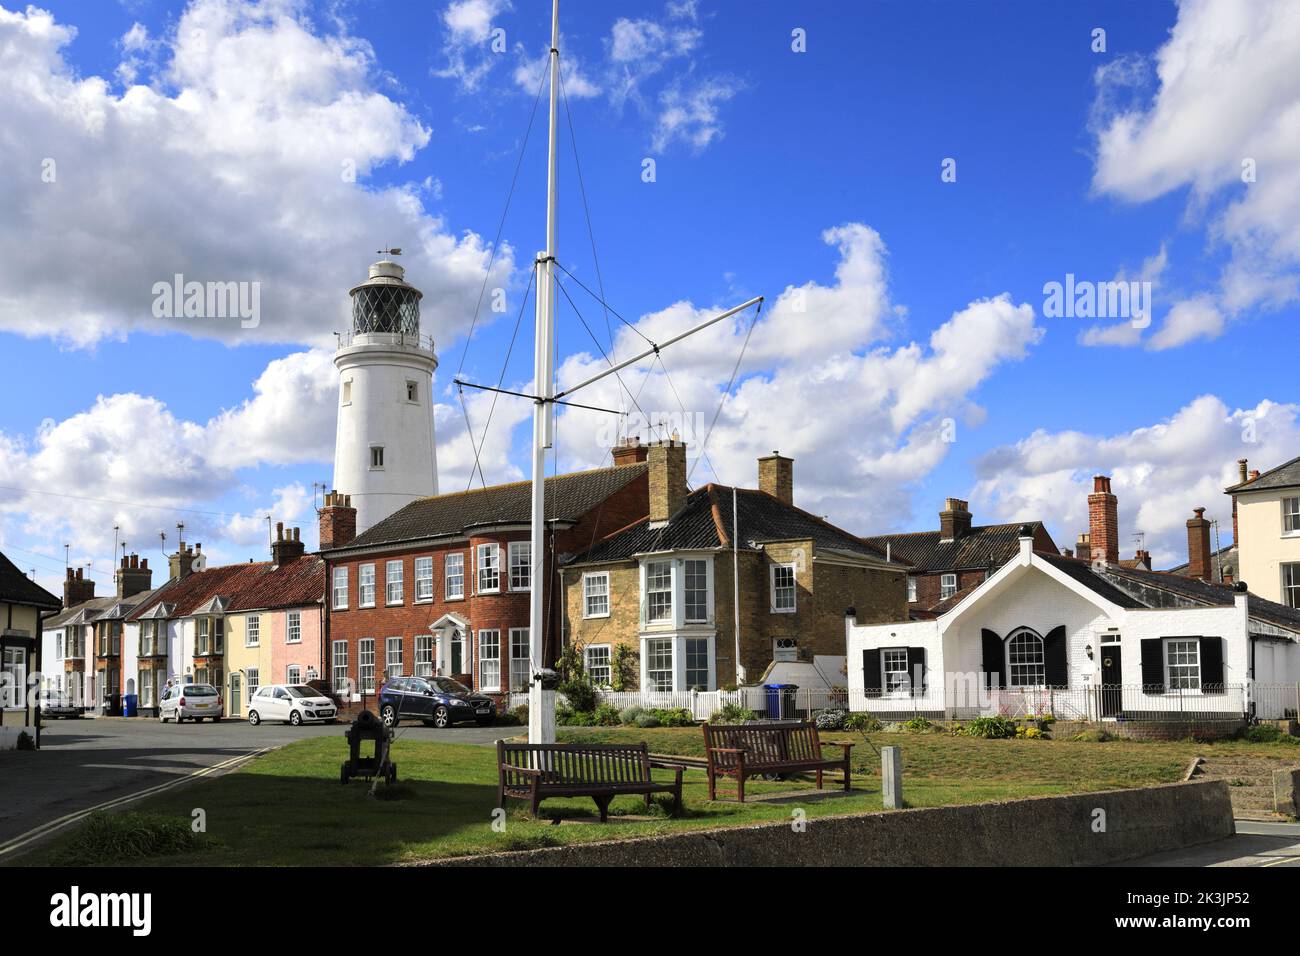 The Southwold Lighthouse, St James green, Southwold town, Suffolk, England, UK Stock Photo